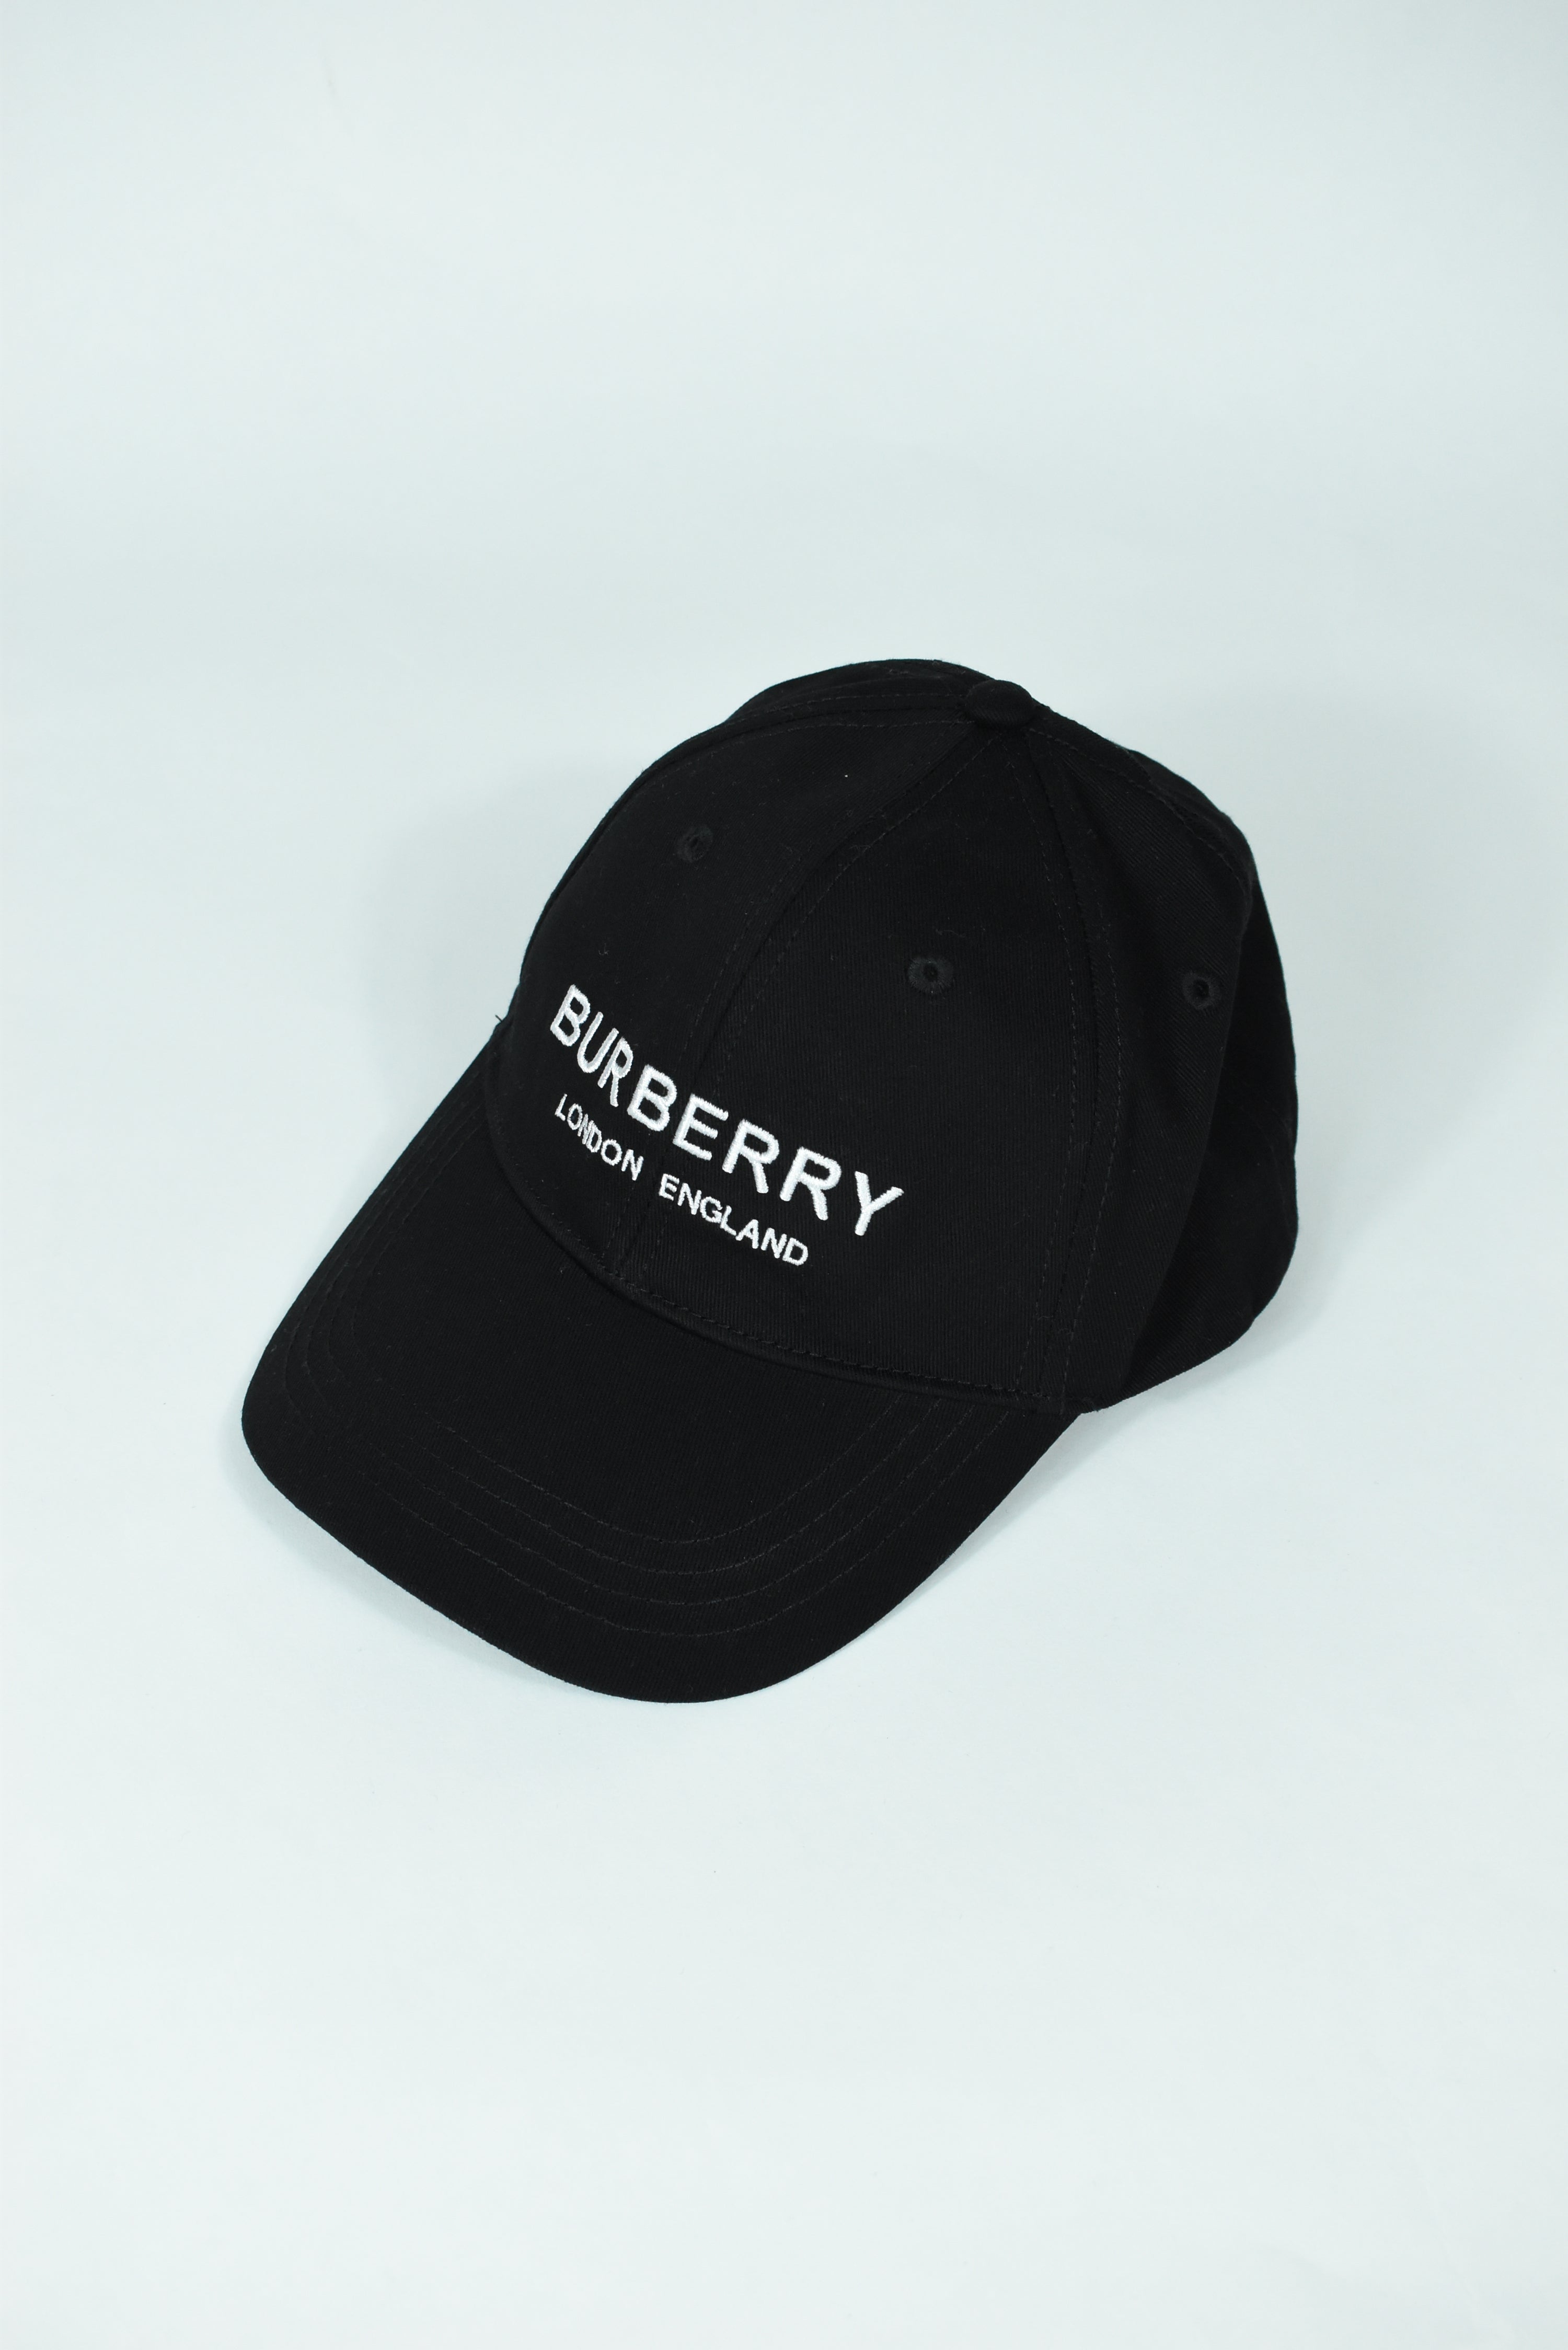 New Black Burberry London Embroidery Cap